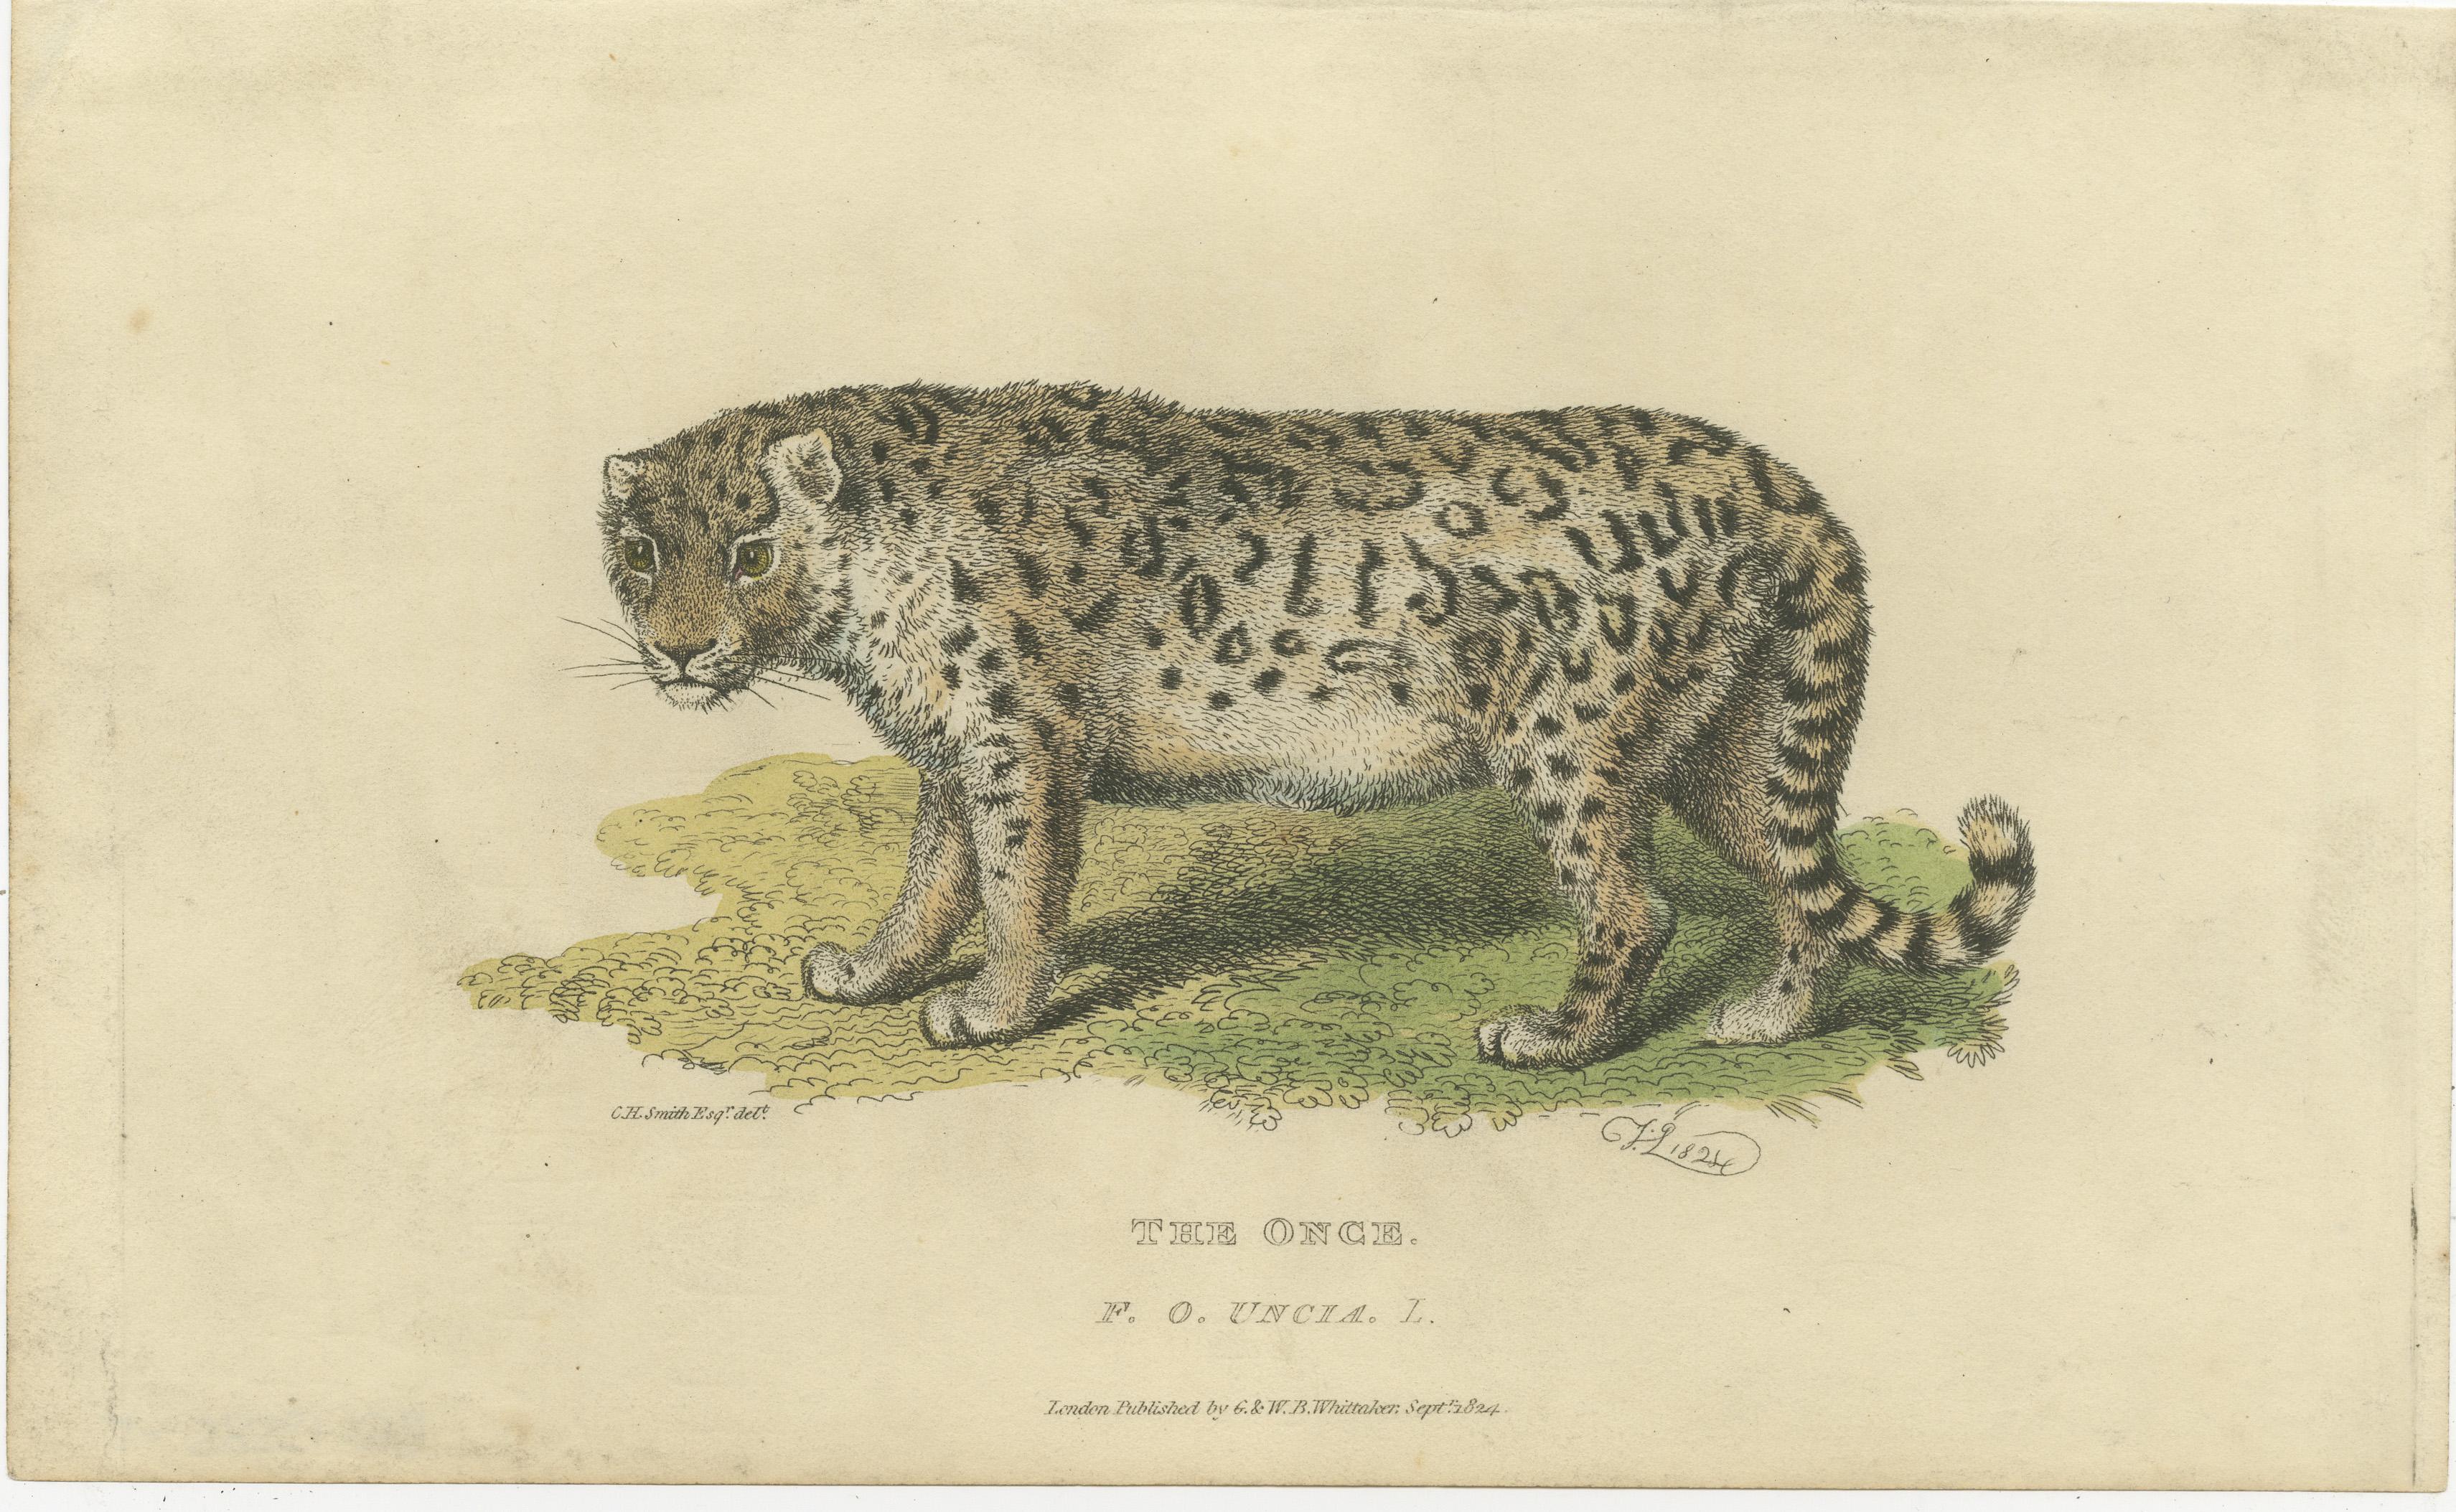 This engraving is a detailed depiction of a snow leopard, also known as an ounce (Panthera uncia). It shows the animal in a profile view, allowing for a clear observation of its physical characteristics, such as the thick fur, powerful build, and